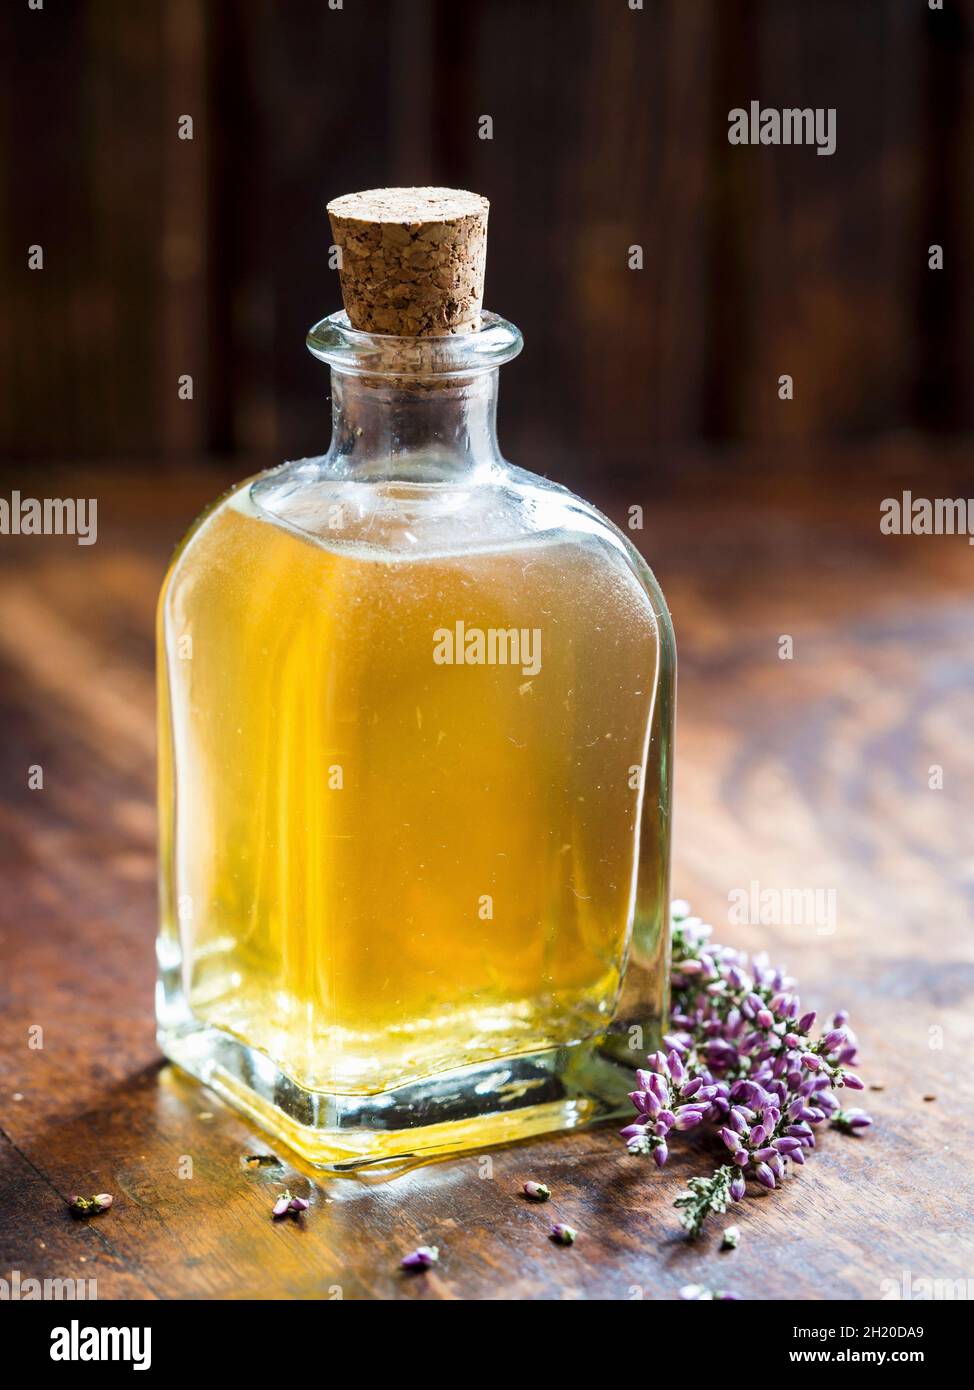 Homemade diy lavender and field horsetail (equisetum arvense) facial toner in a glass bottle Stock Photo